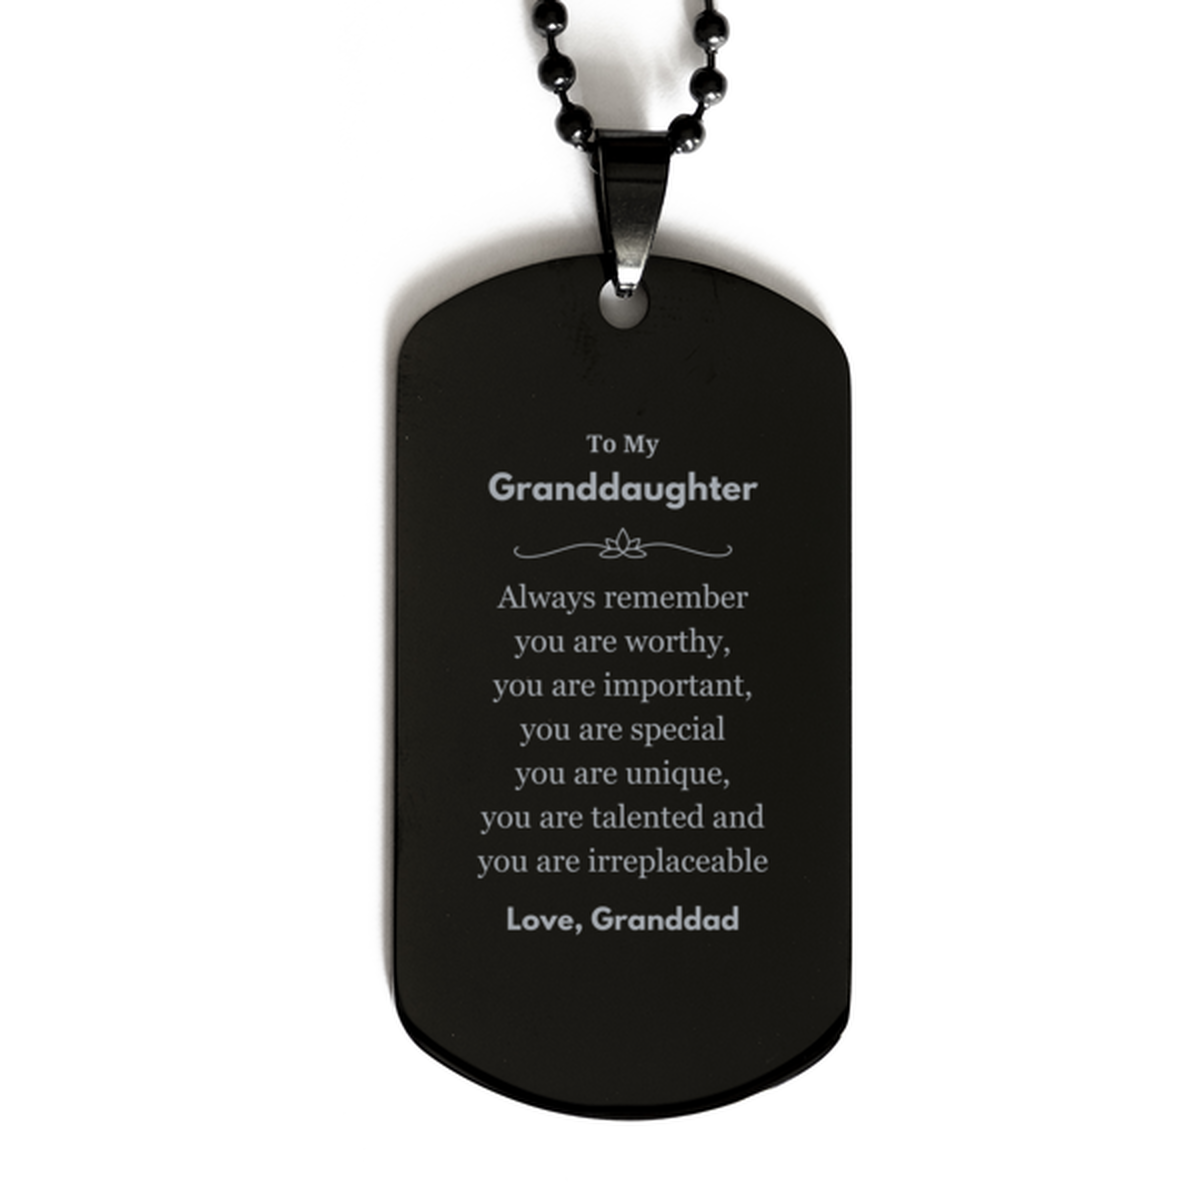 Granddaughter Birthday Gifts from Granddad, Inspirational Black Dog Tag for Granddaughter Christmas Graduation Gifts for Granddaughter Always remember you are worthy, you are important. Love, Granddad